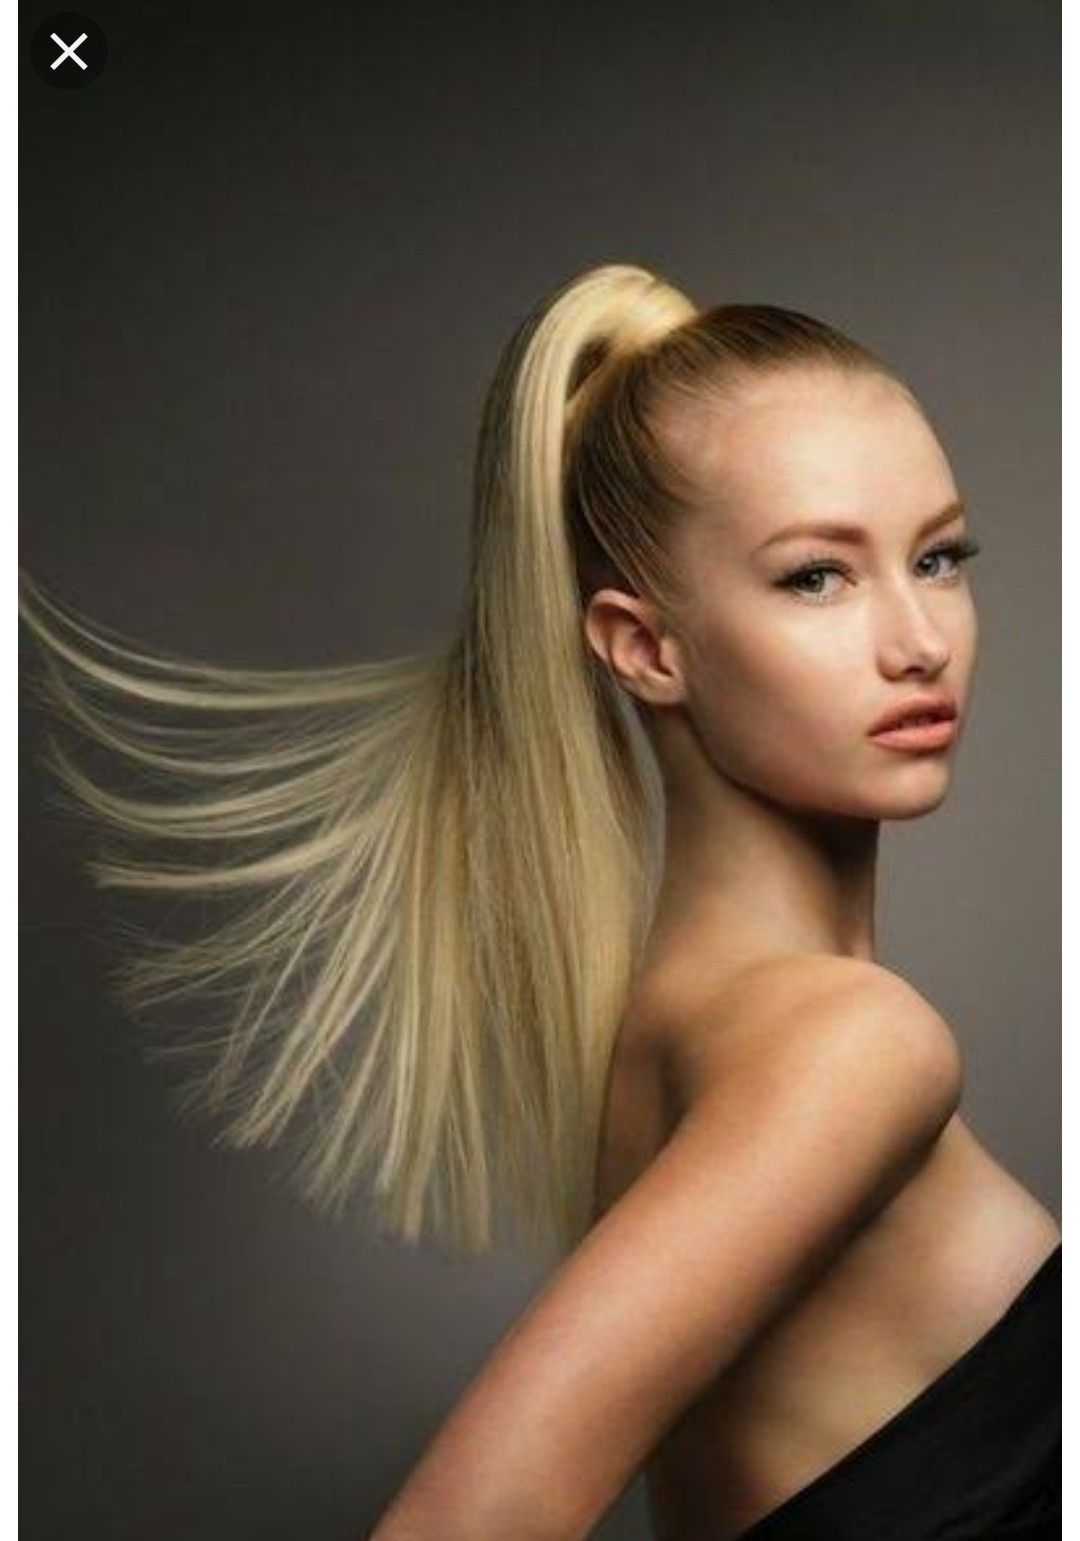 Common Hair Care Mistakes to Avoid